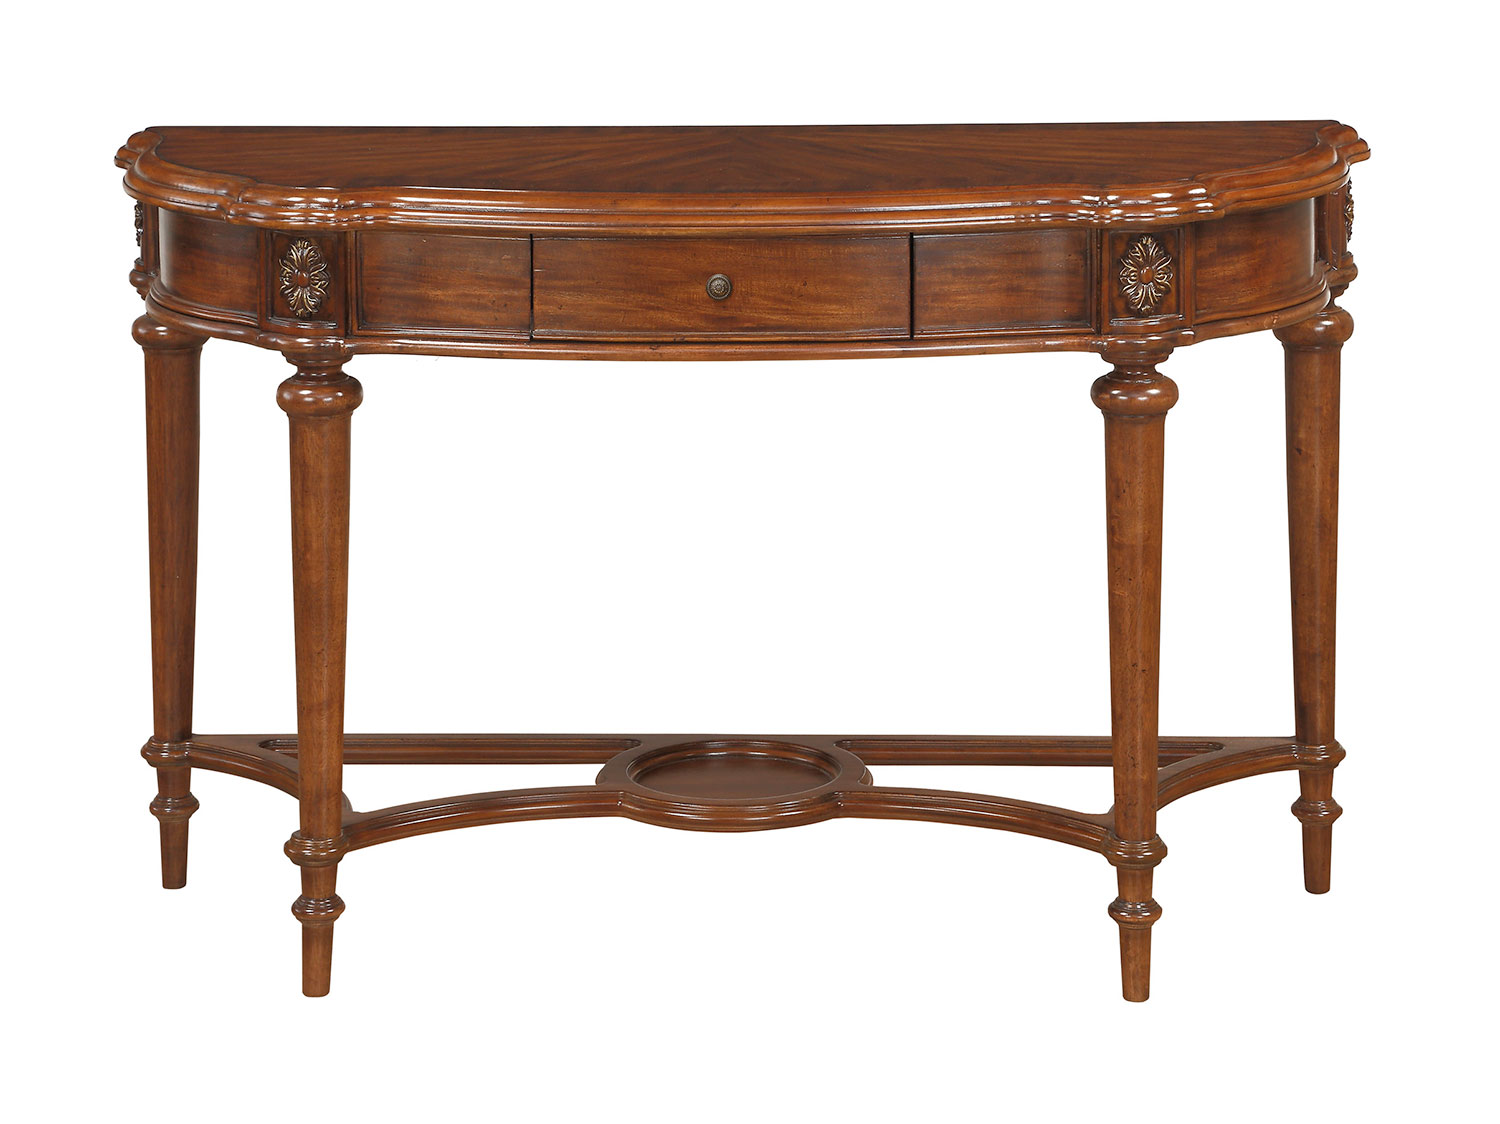 Homelegance Barbary Sofa Table with Functional Drawer - Cherry